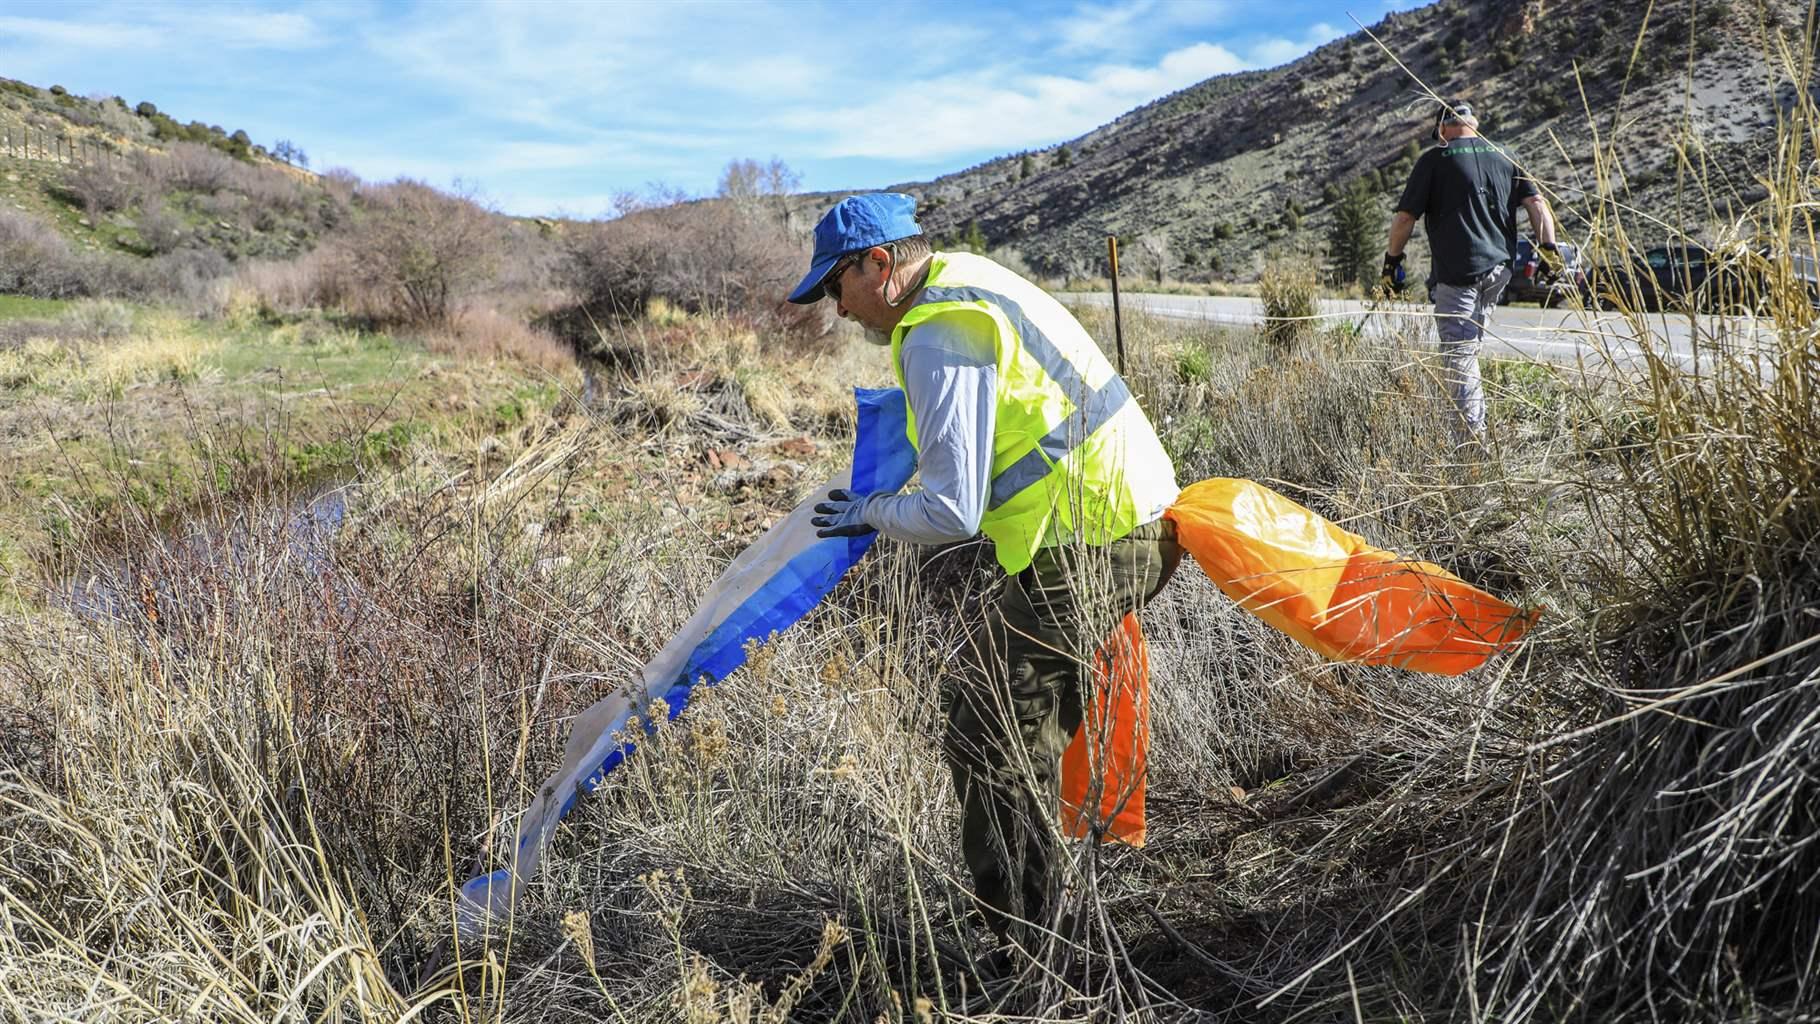 John Packer, owner of Fly Fishing Outfitters, grabs a plastic bag during the annual highway cleanup Saturday, May 1, 2021 near Wolcott, Colo. Packer said every year they play a game to find the most common beer bottle or can.